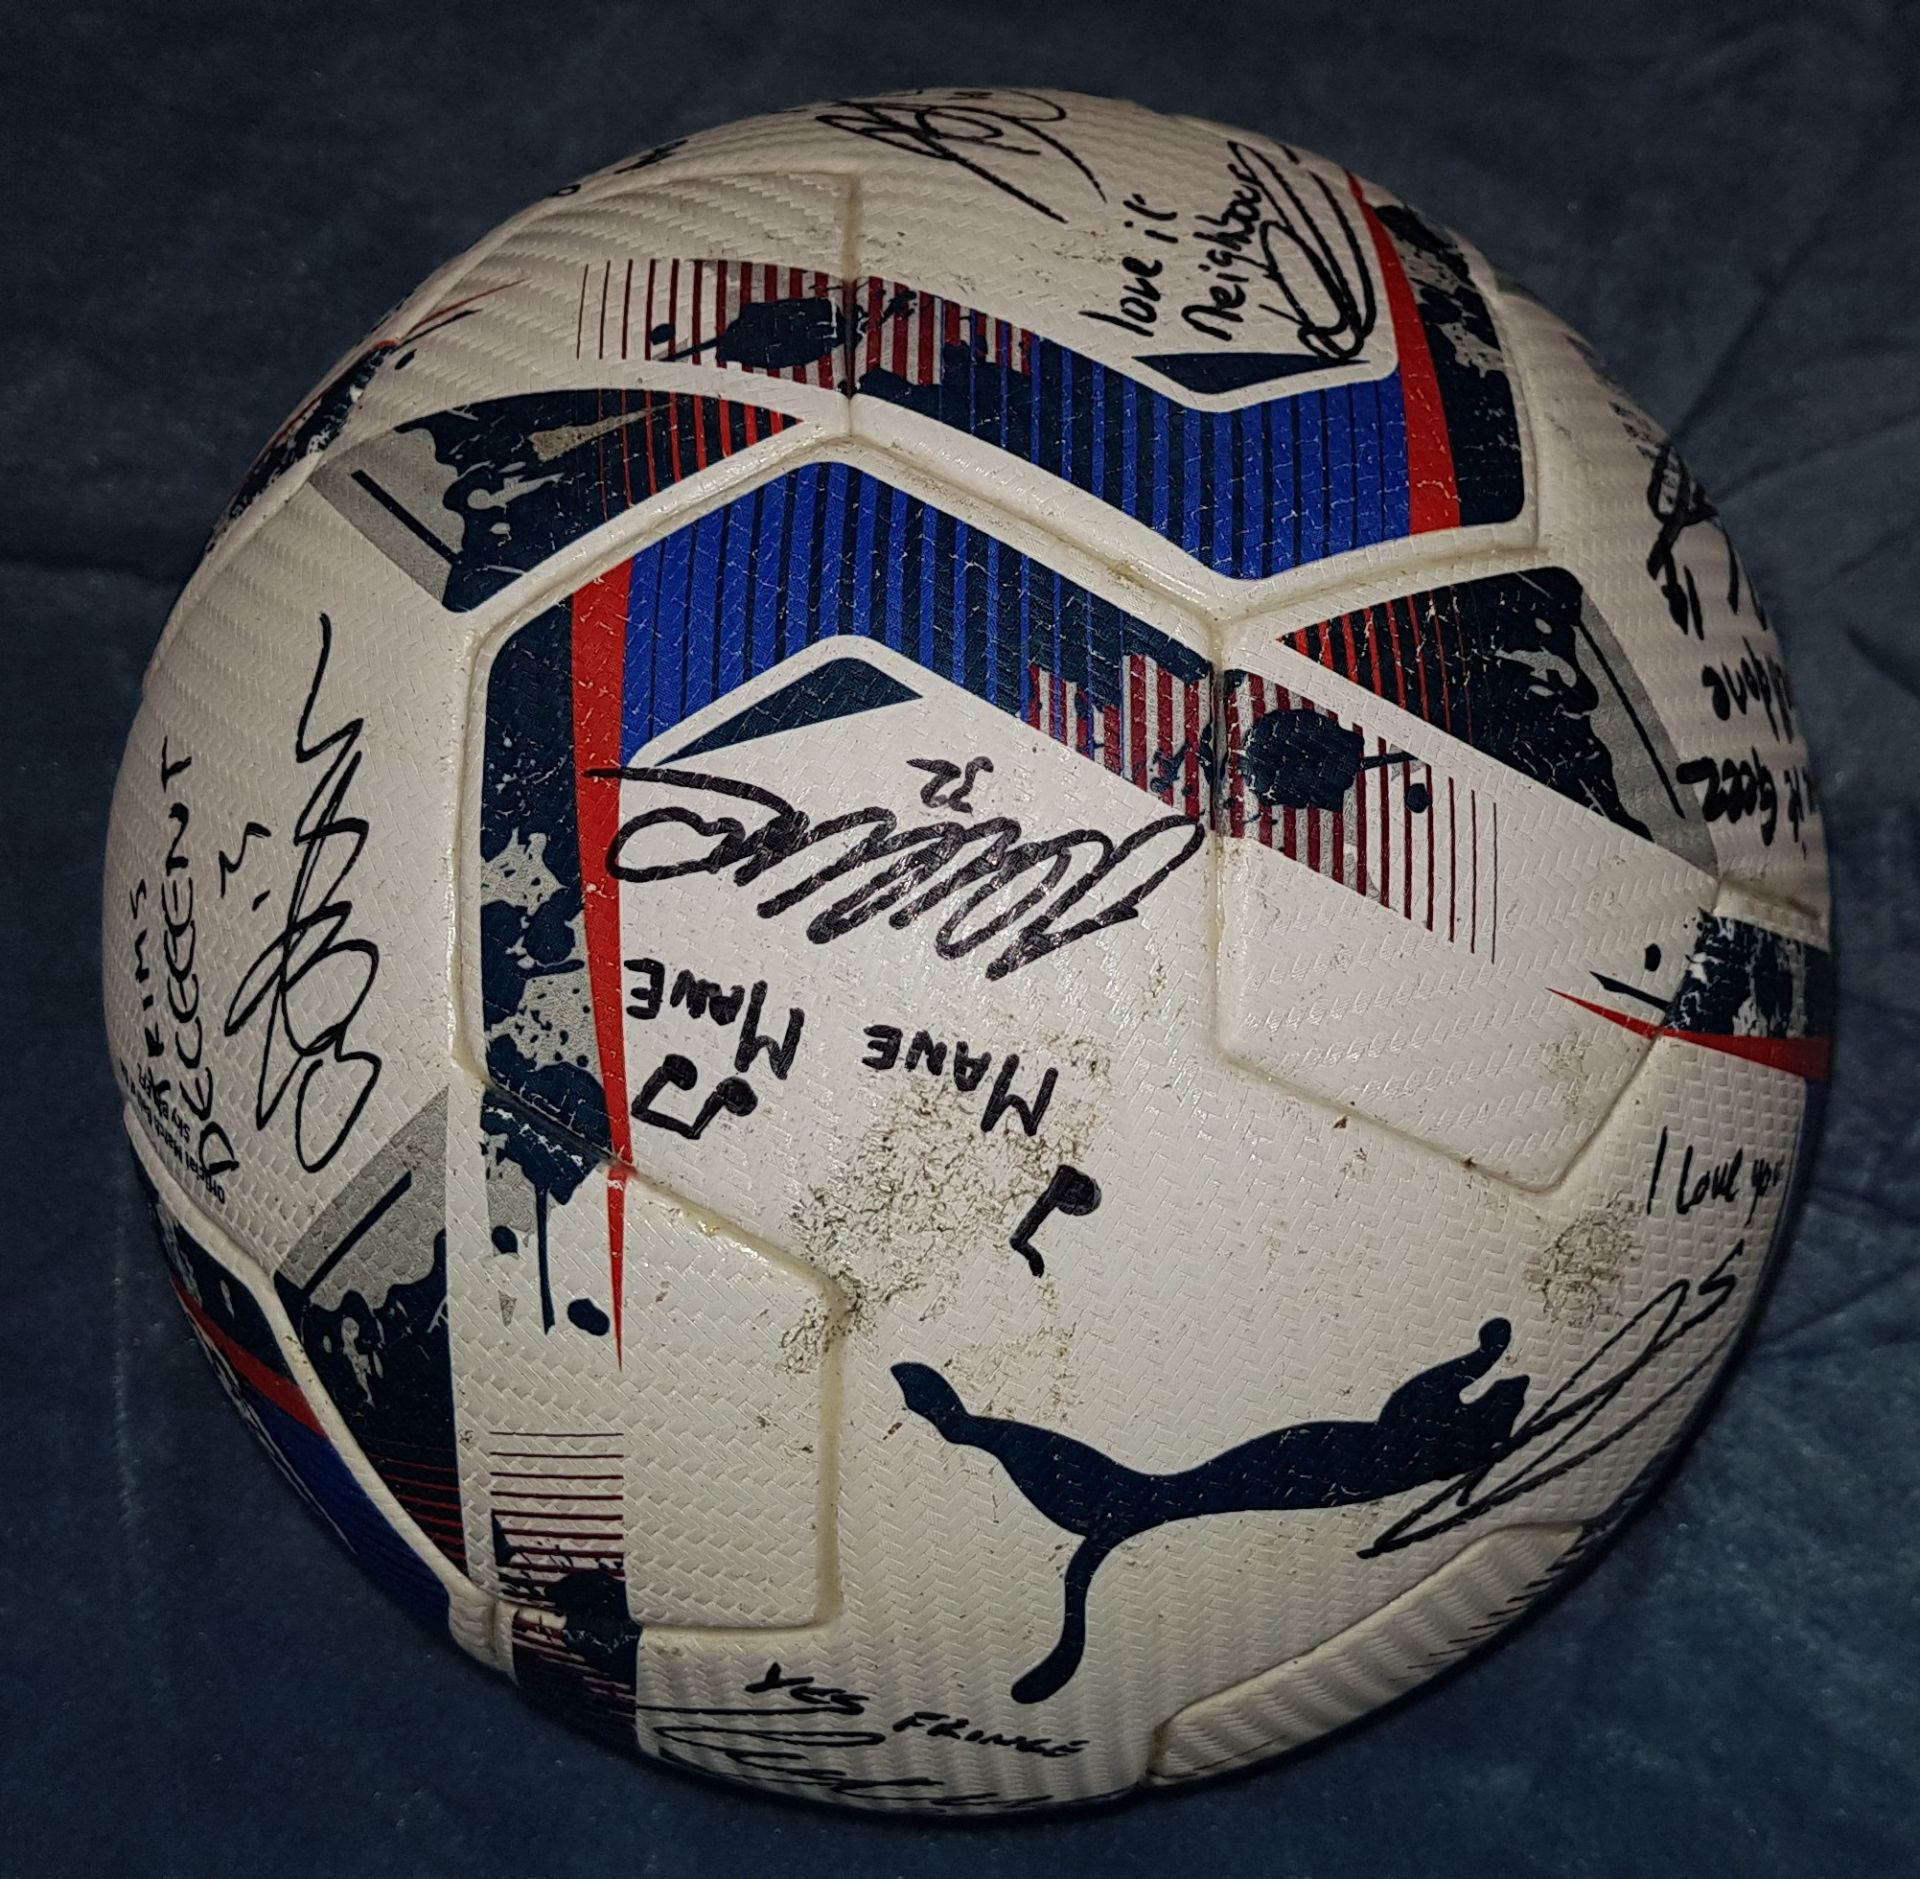 PUMA SIZE 5 FOOTBALL FIFA QUALITY PRO SKYBET EFL WITH NUMEROUS UNKNOWN SIGNATURES (SEE IMAGES) - Bild 2 aus 4